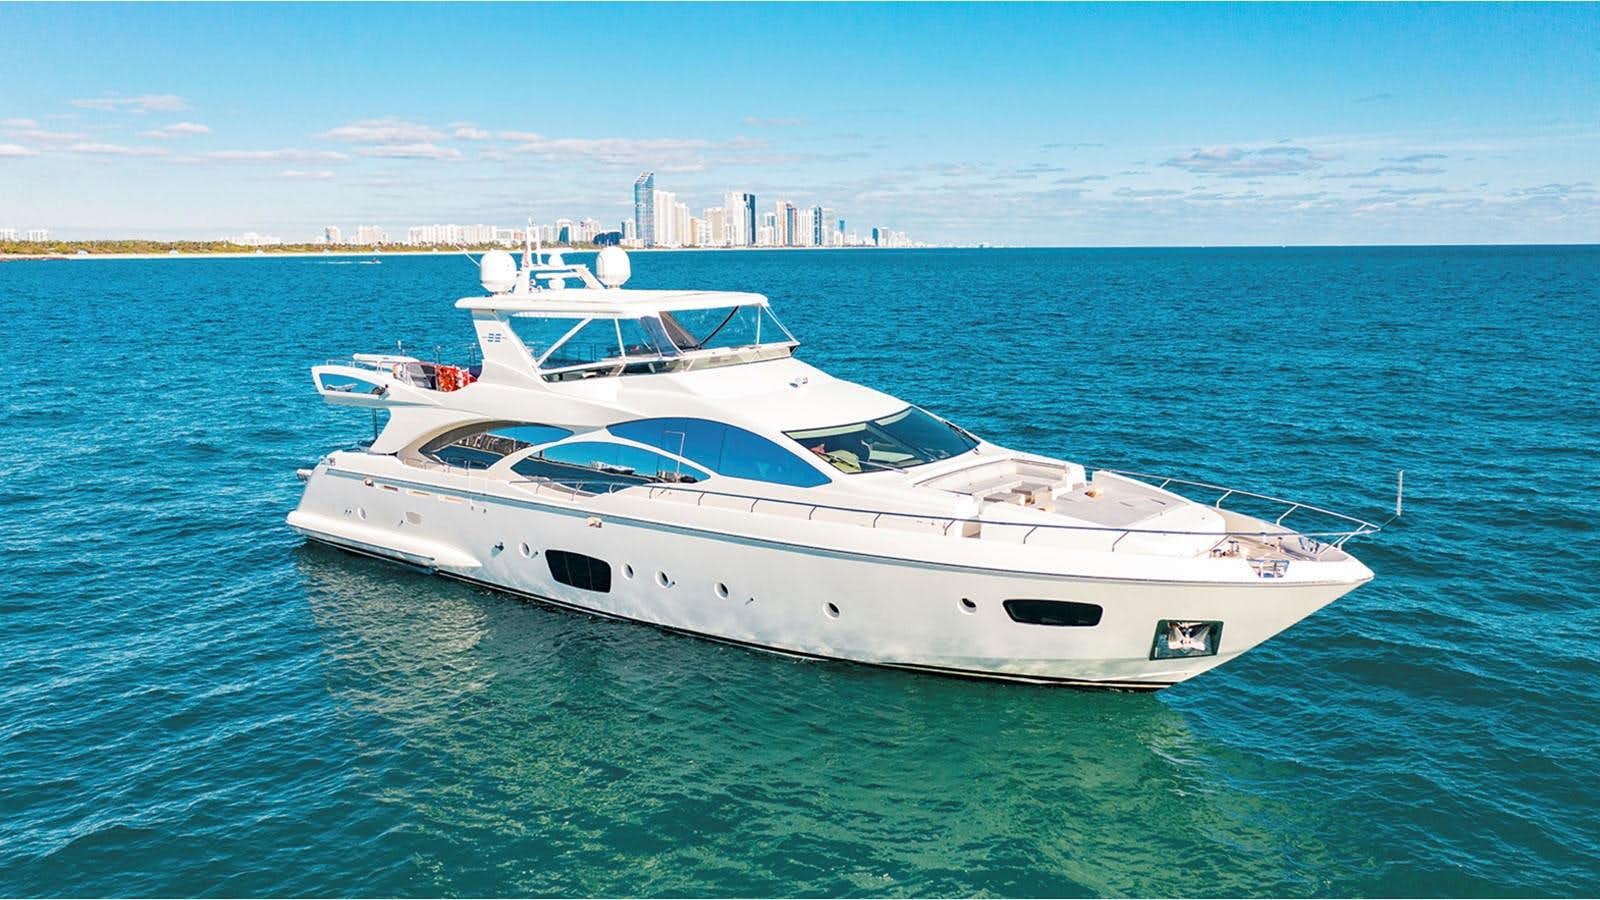 Watch Video for BT 2 Yacht for Sale